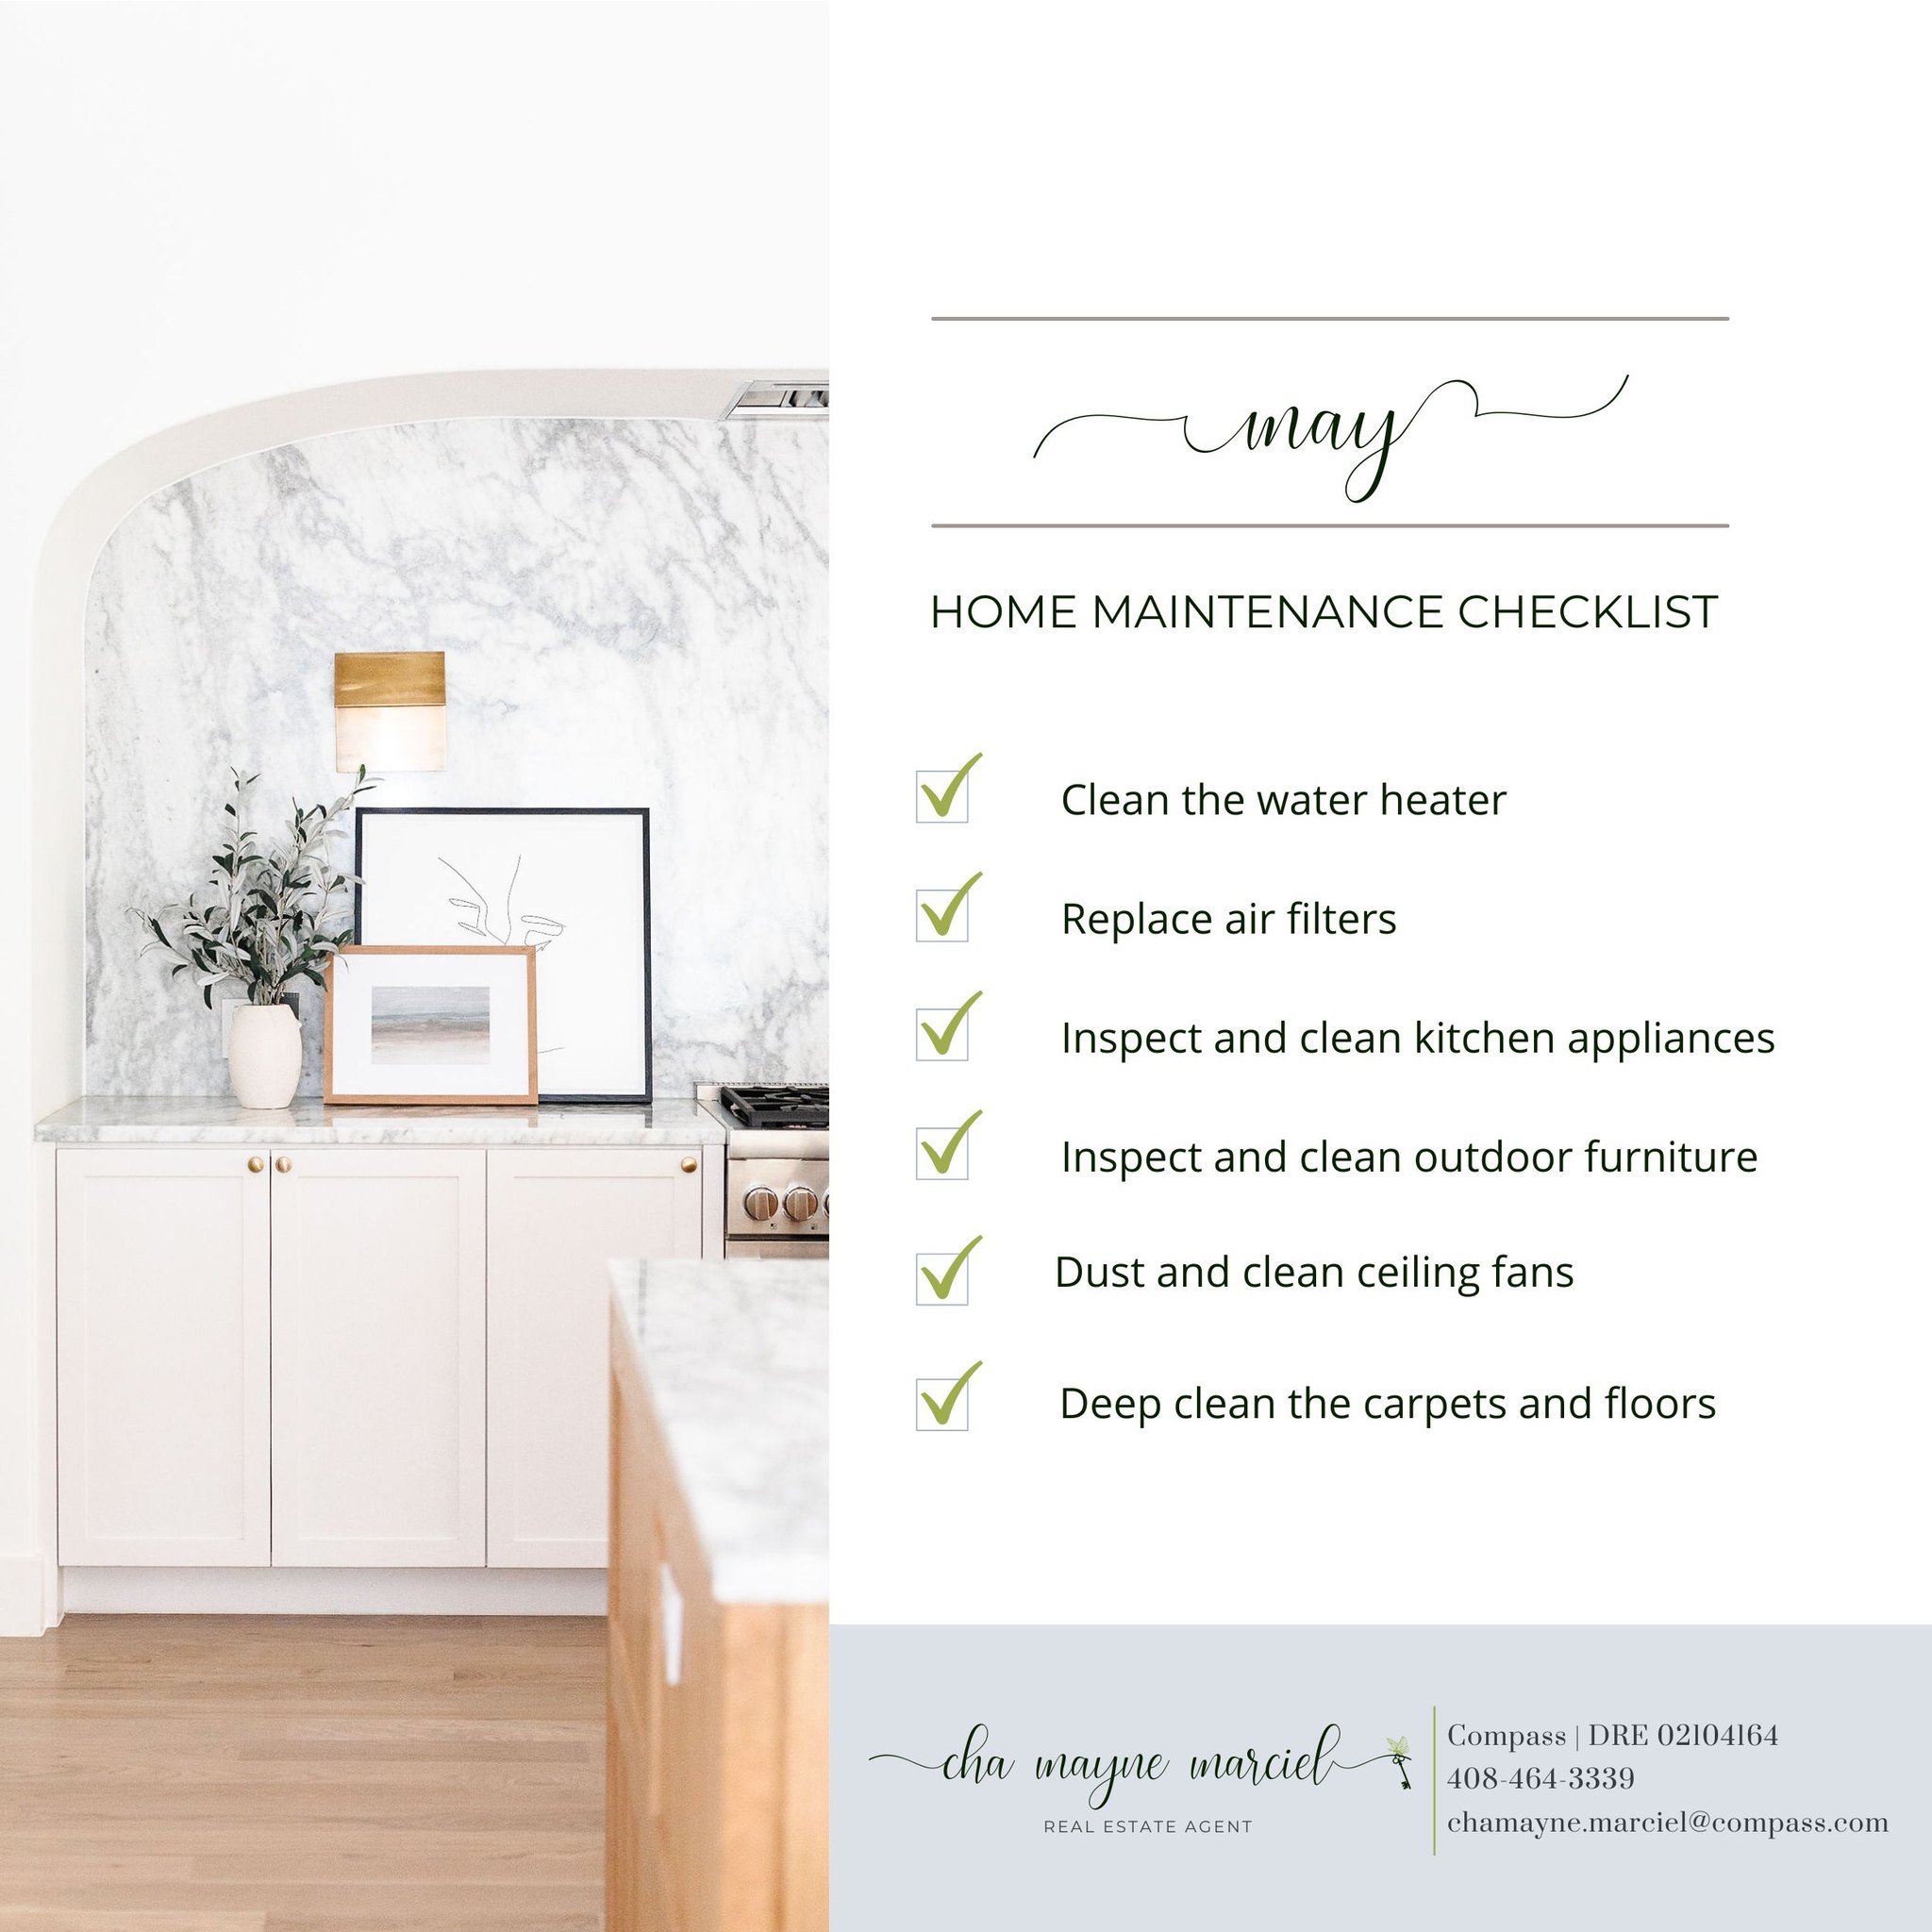 Time for your May Home Maintenance Checklist! If you&rsquo;ve been considering putting your home on the market, it's important to keep it looking and running it's best - so that it's ready to go when it's time to list. Regular home maintenance can he